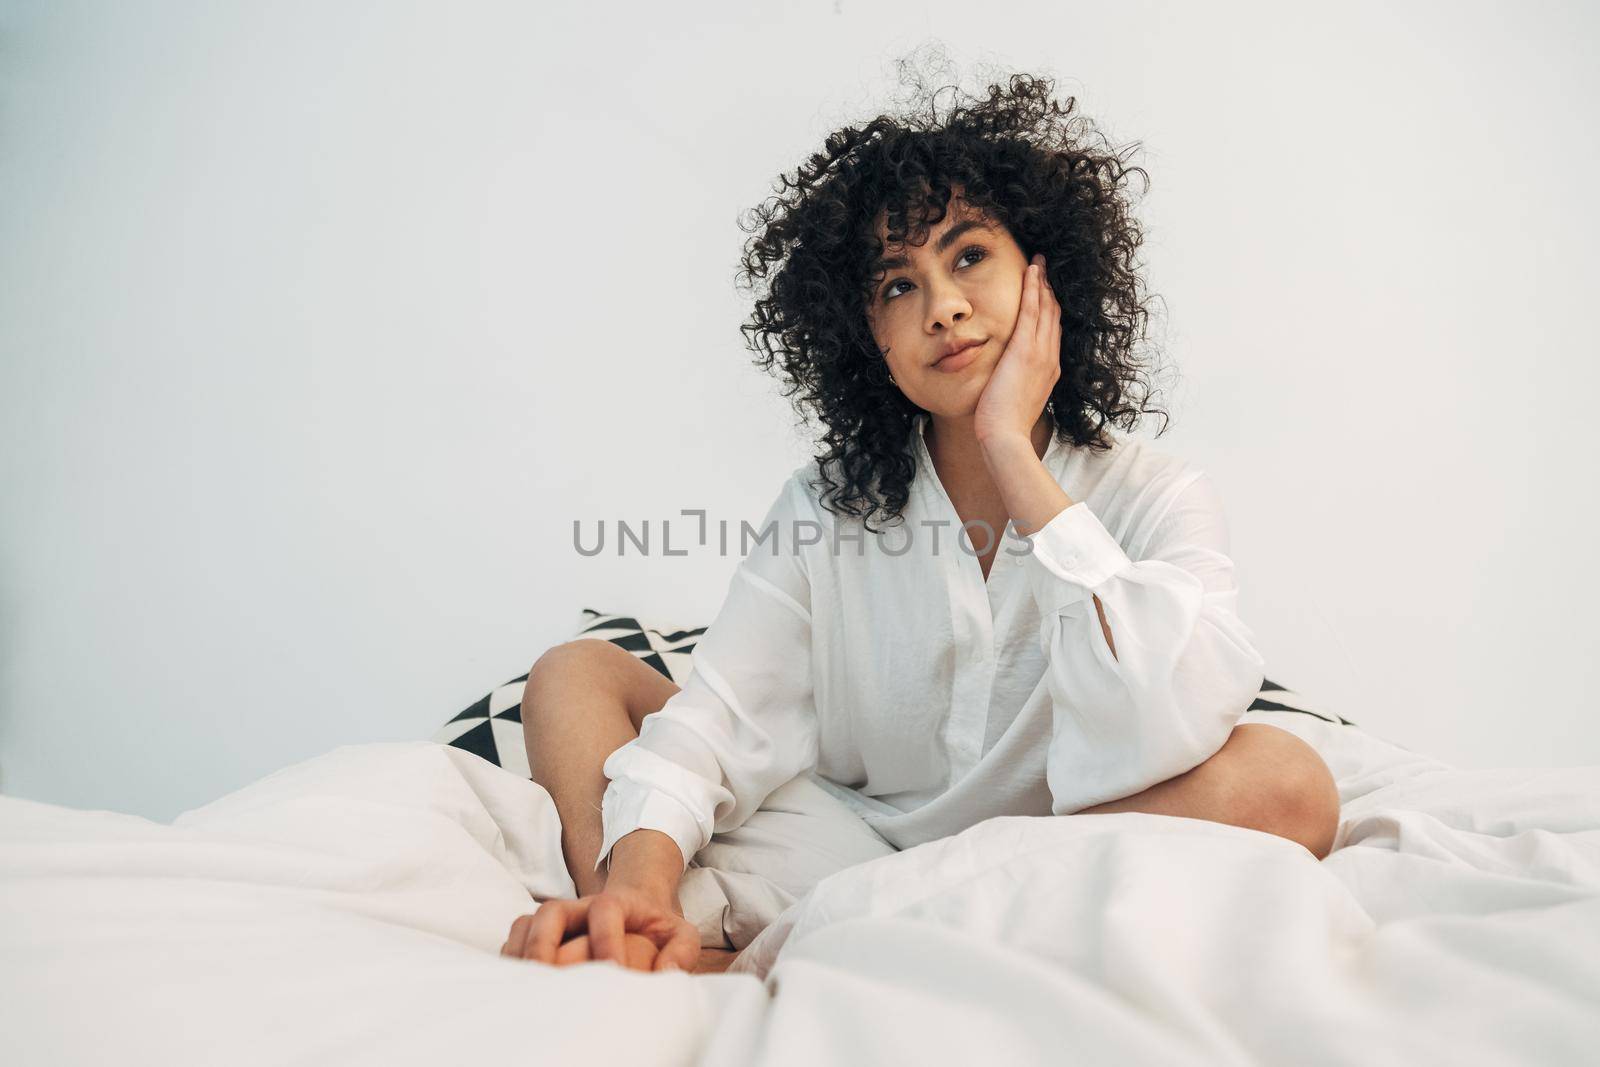 Pensive young mixed race woman with curly hair sitting on bed resting face on hand. Copy space. Lifestyle concept.